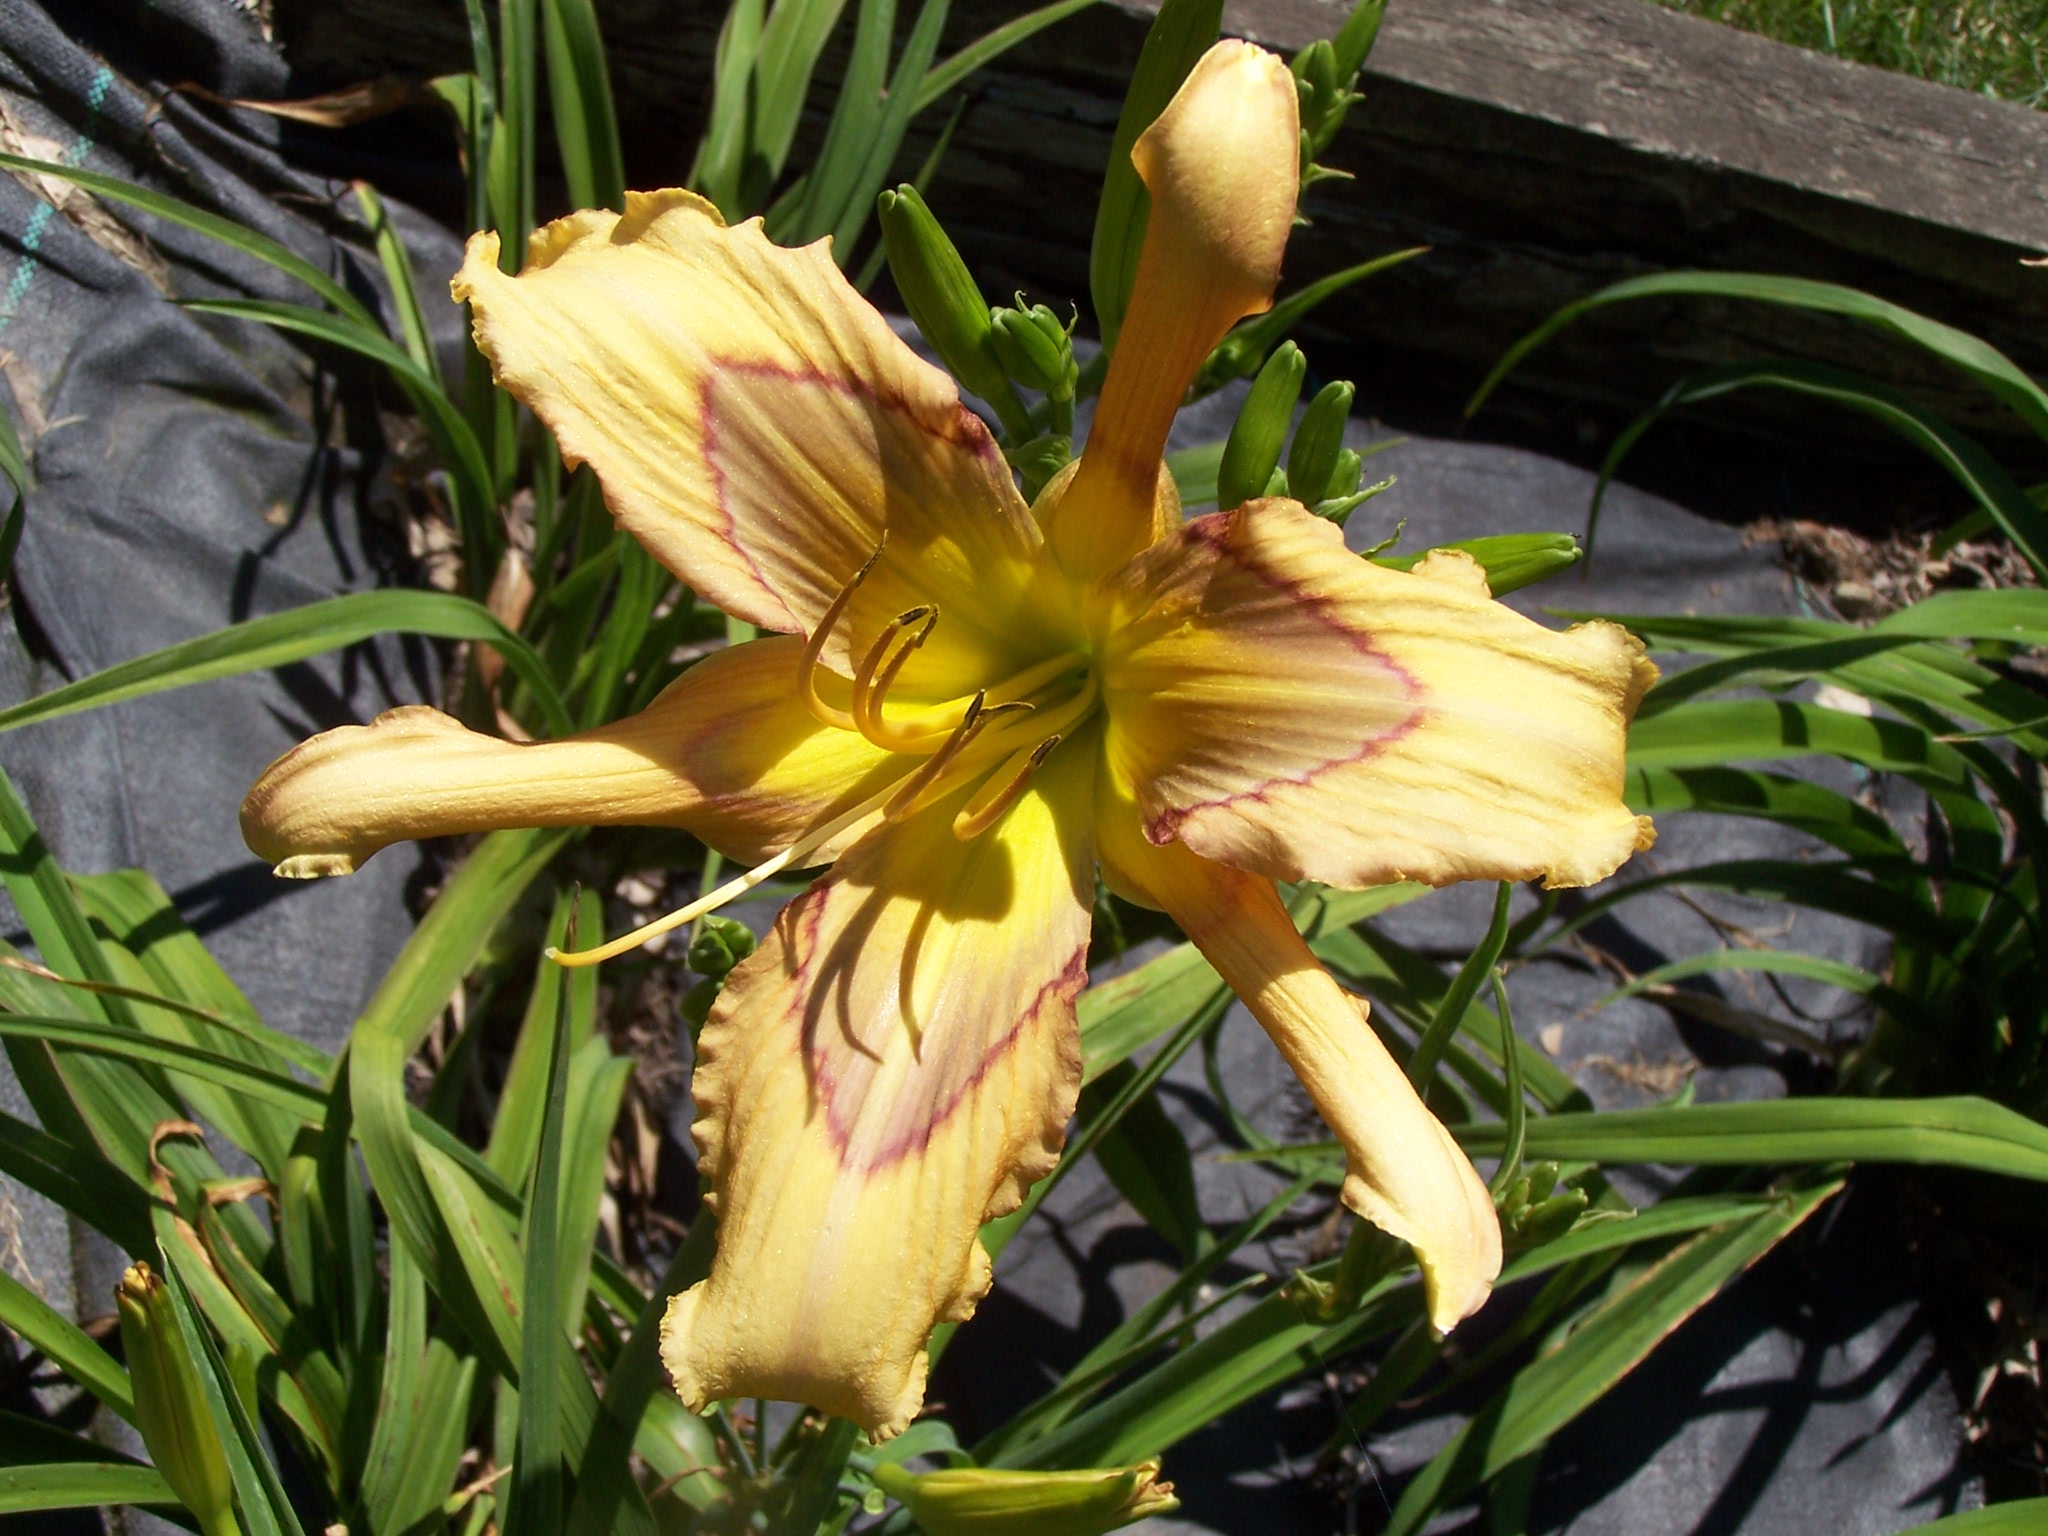 Bloomin' Moon daylily